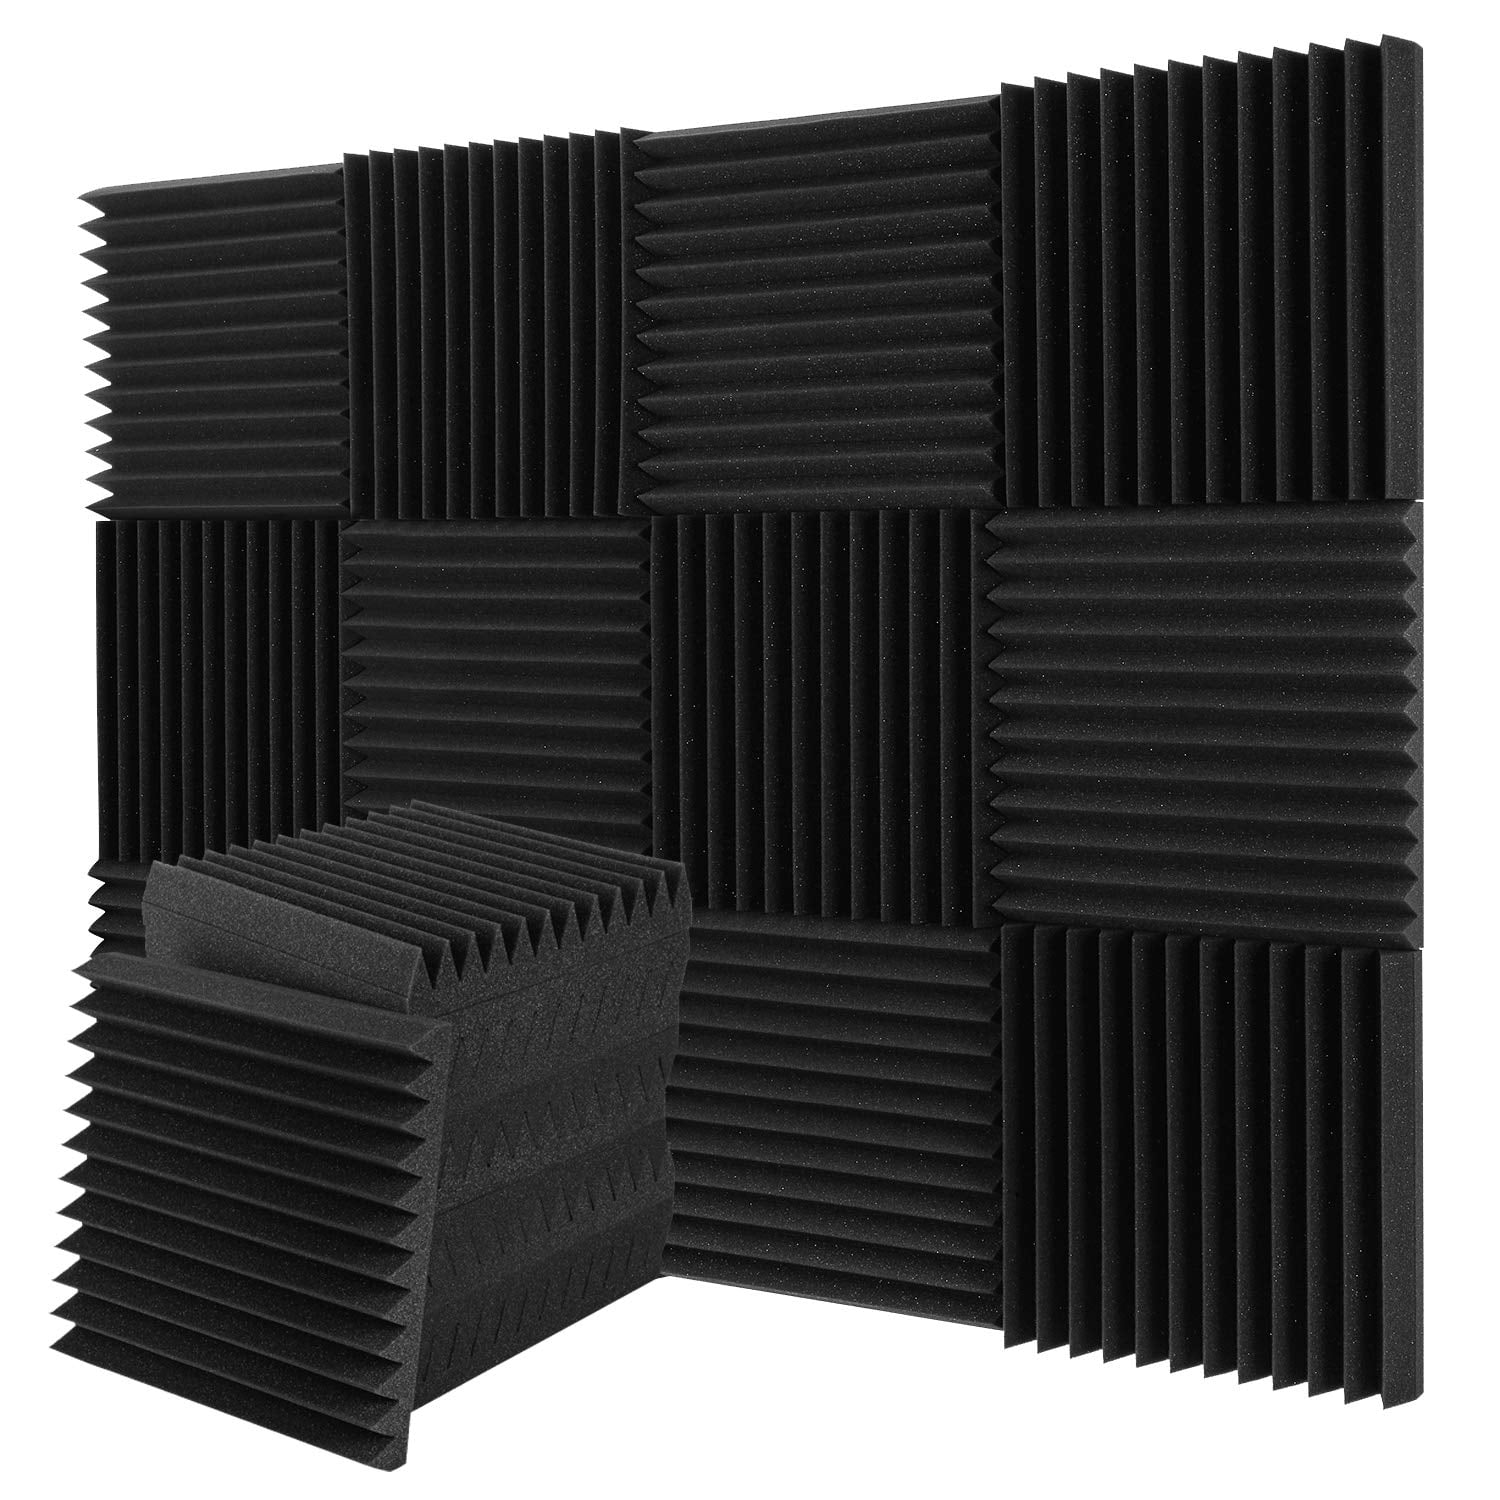 12 Pack Acoustic Foam Panels Self-Adhesive 2 X 12 X 12 Acoustic Panels Soundproof Padding Wall Tiles Panels High Density Sound Dampening Absorb Noise for Studio Home Office 